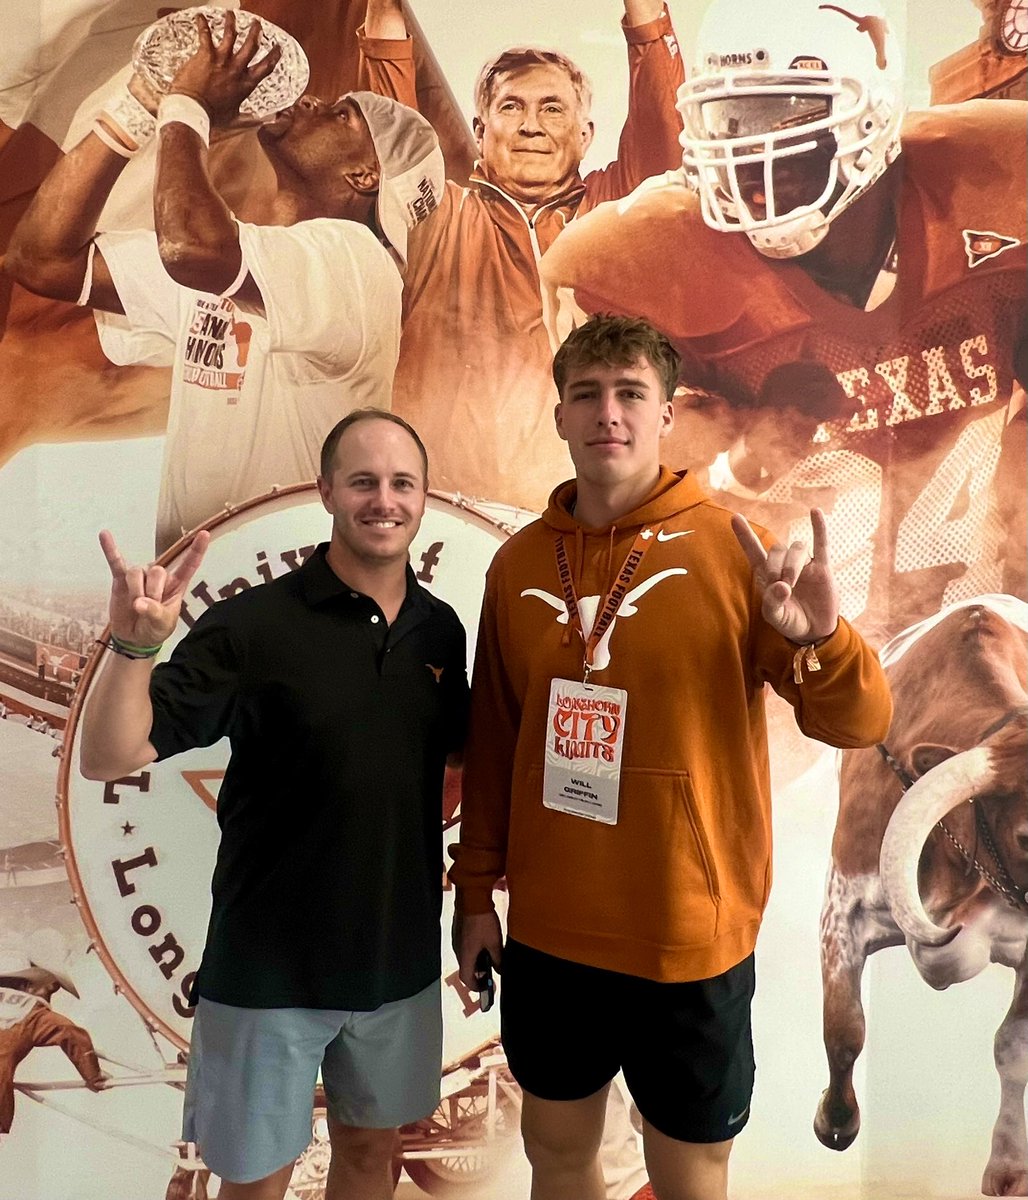 Will Griffin '26 in Austin at the University of Texas! Will is currently the 4th ranked quarterback nationally in the class of 2026 according to 247 Sports. #AMDG #JesuitFootball #GoTigers